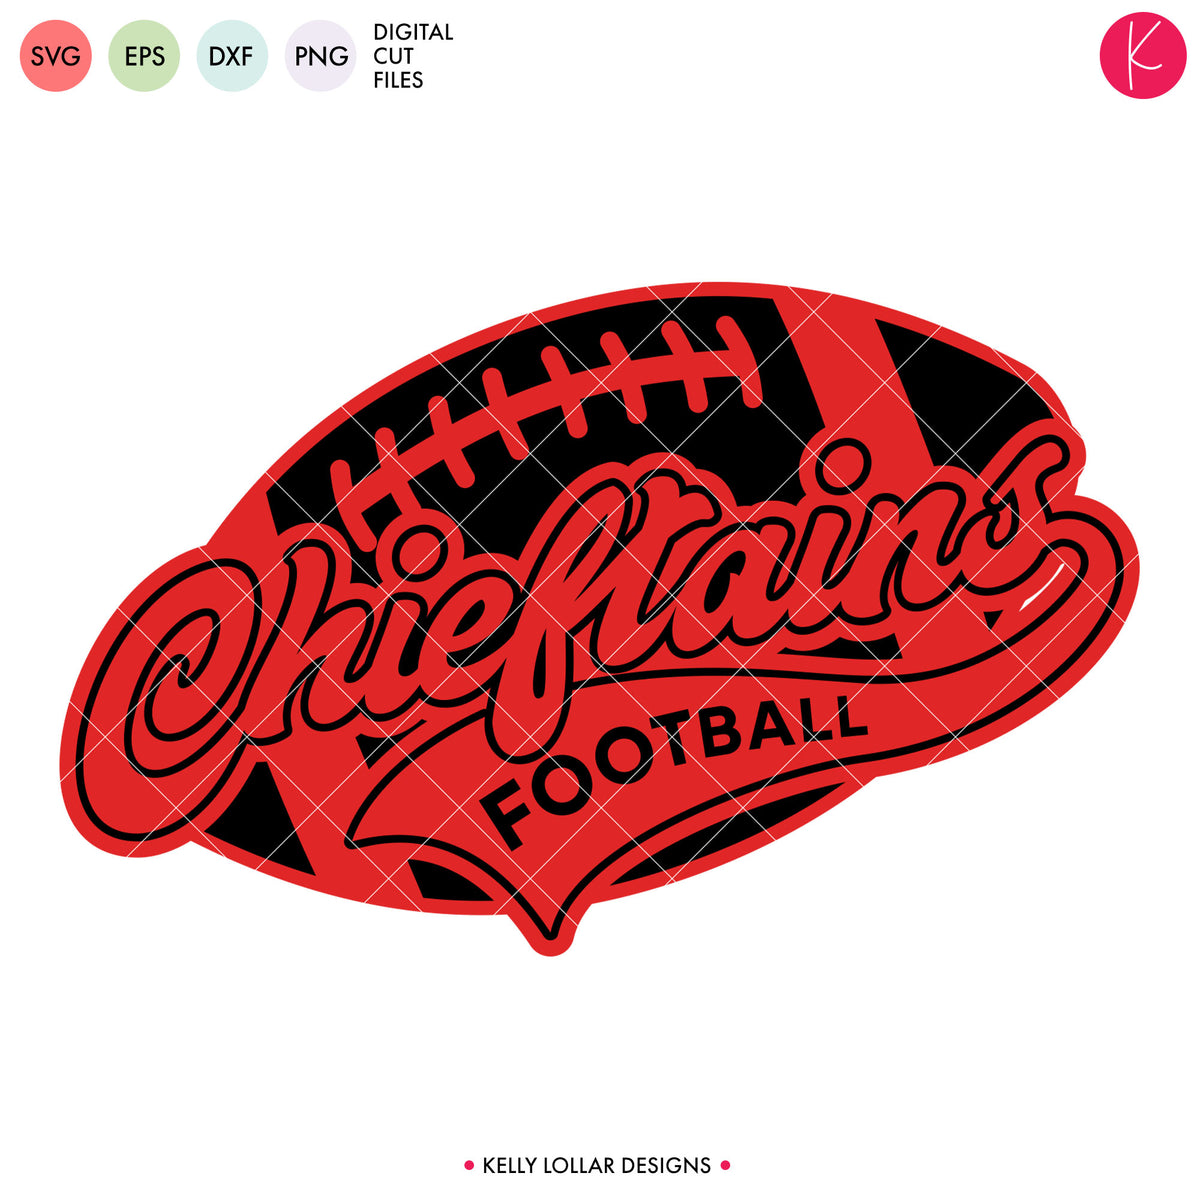 Chieftains Football Bundle | SVG DXF EPS PNG Cut Files